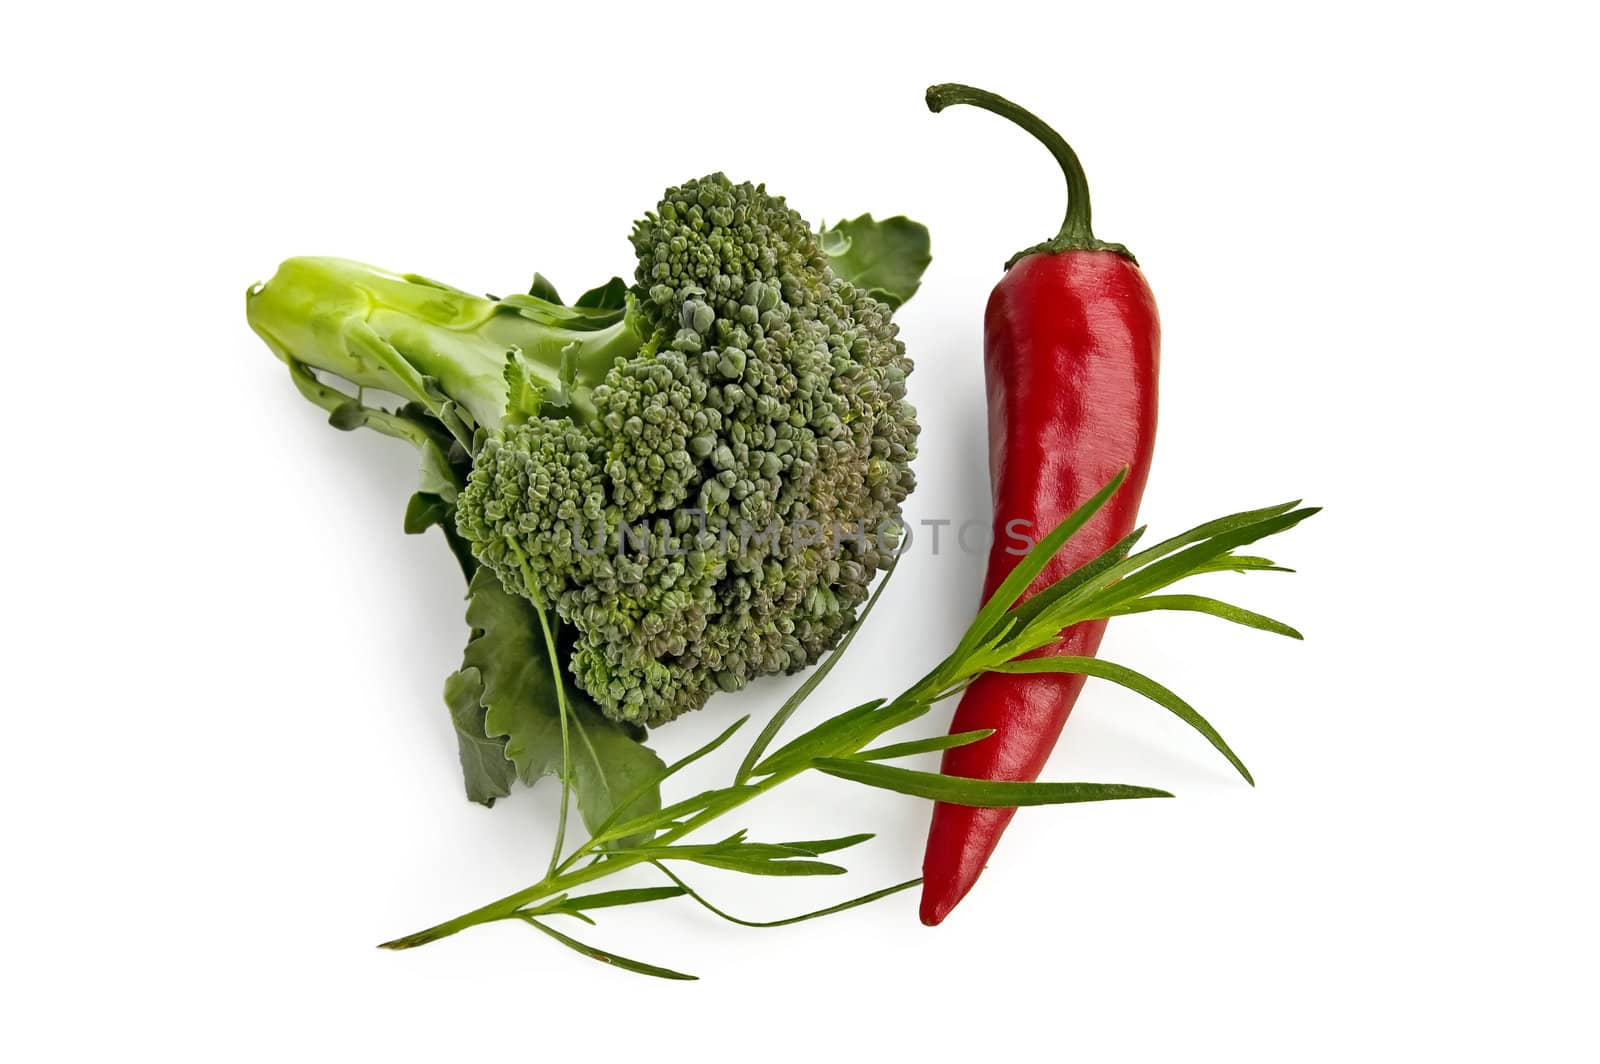 Broccoli, red hot pepper, a sprig of tarragon isolated on a white background